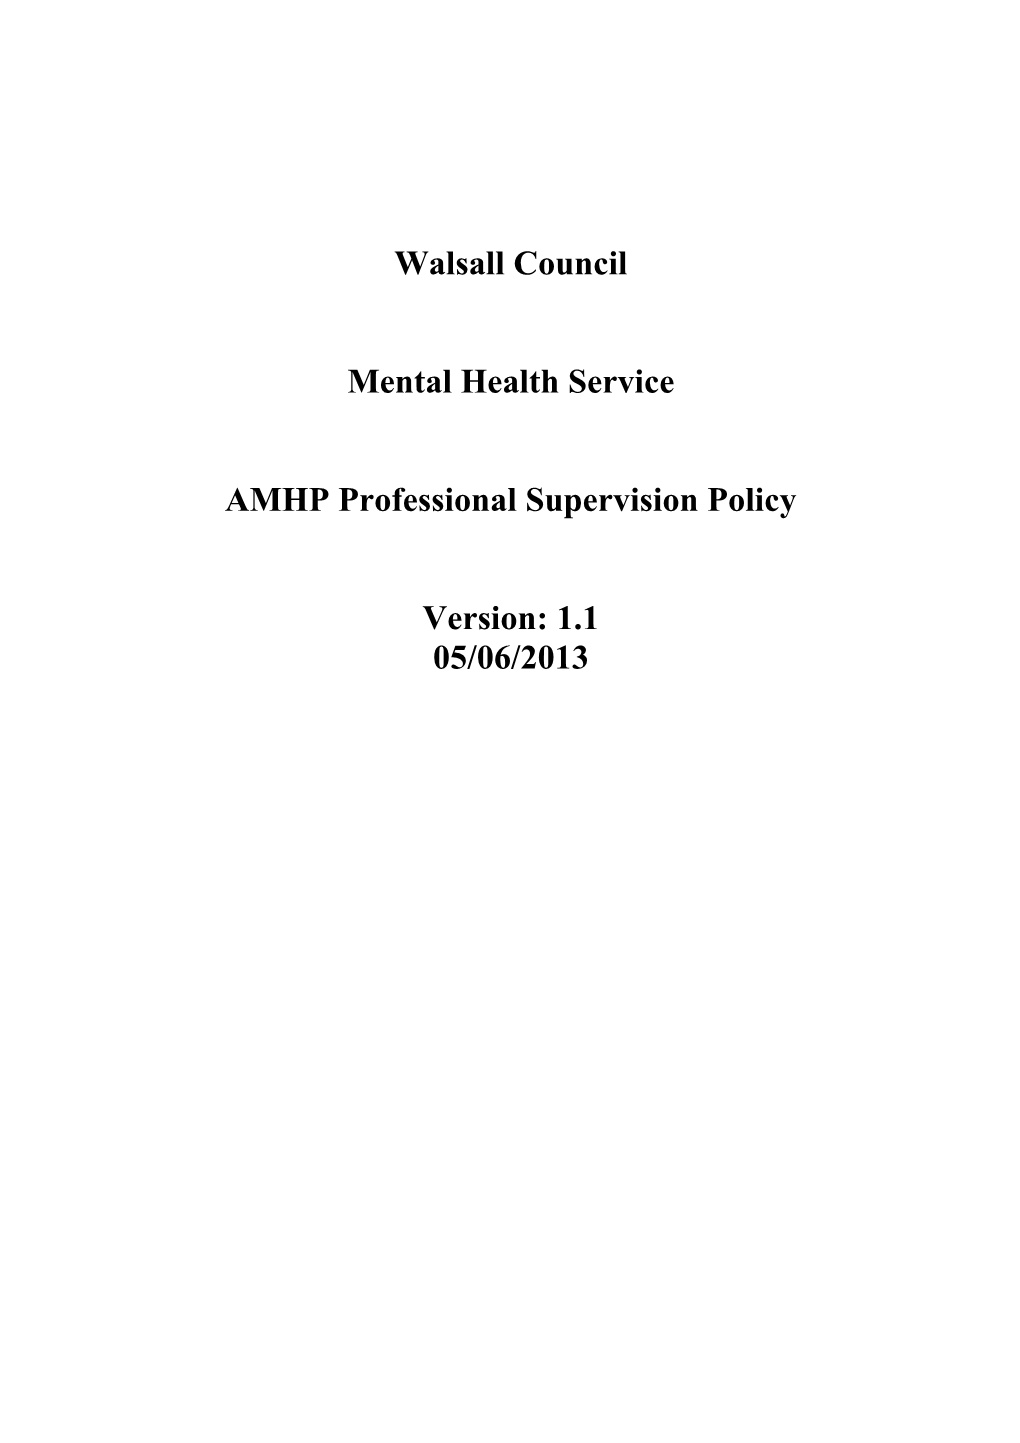 AMHP Professional Supervision Policy